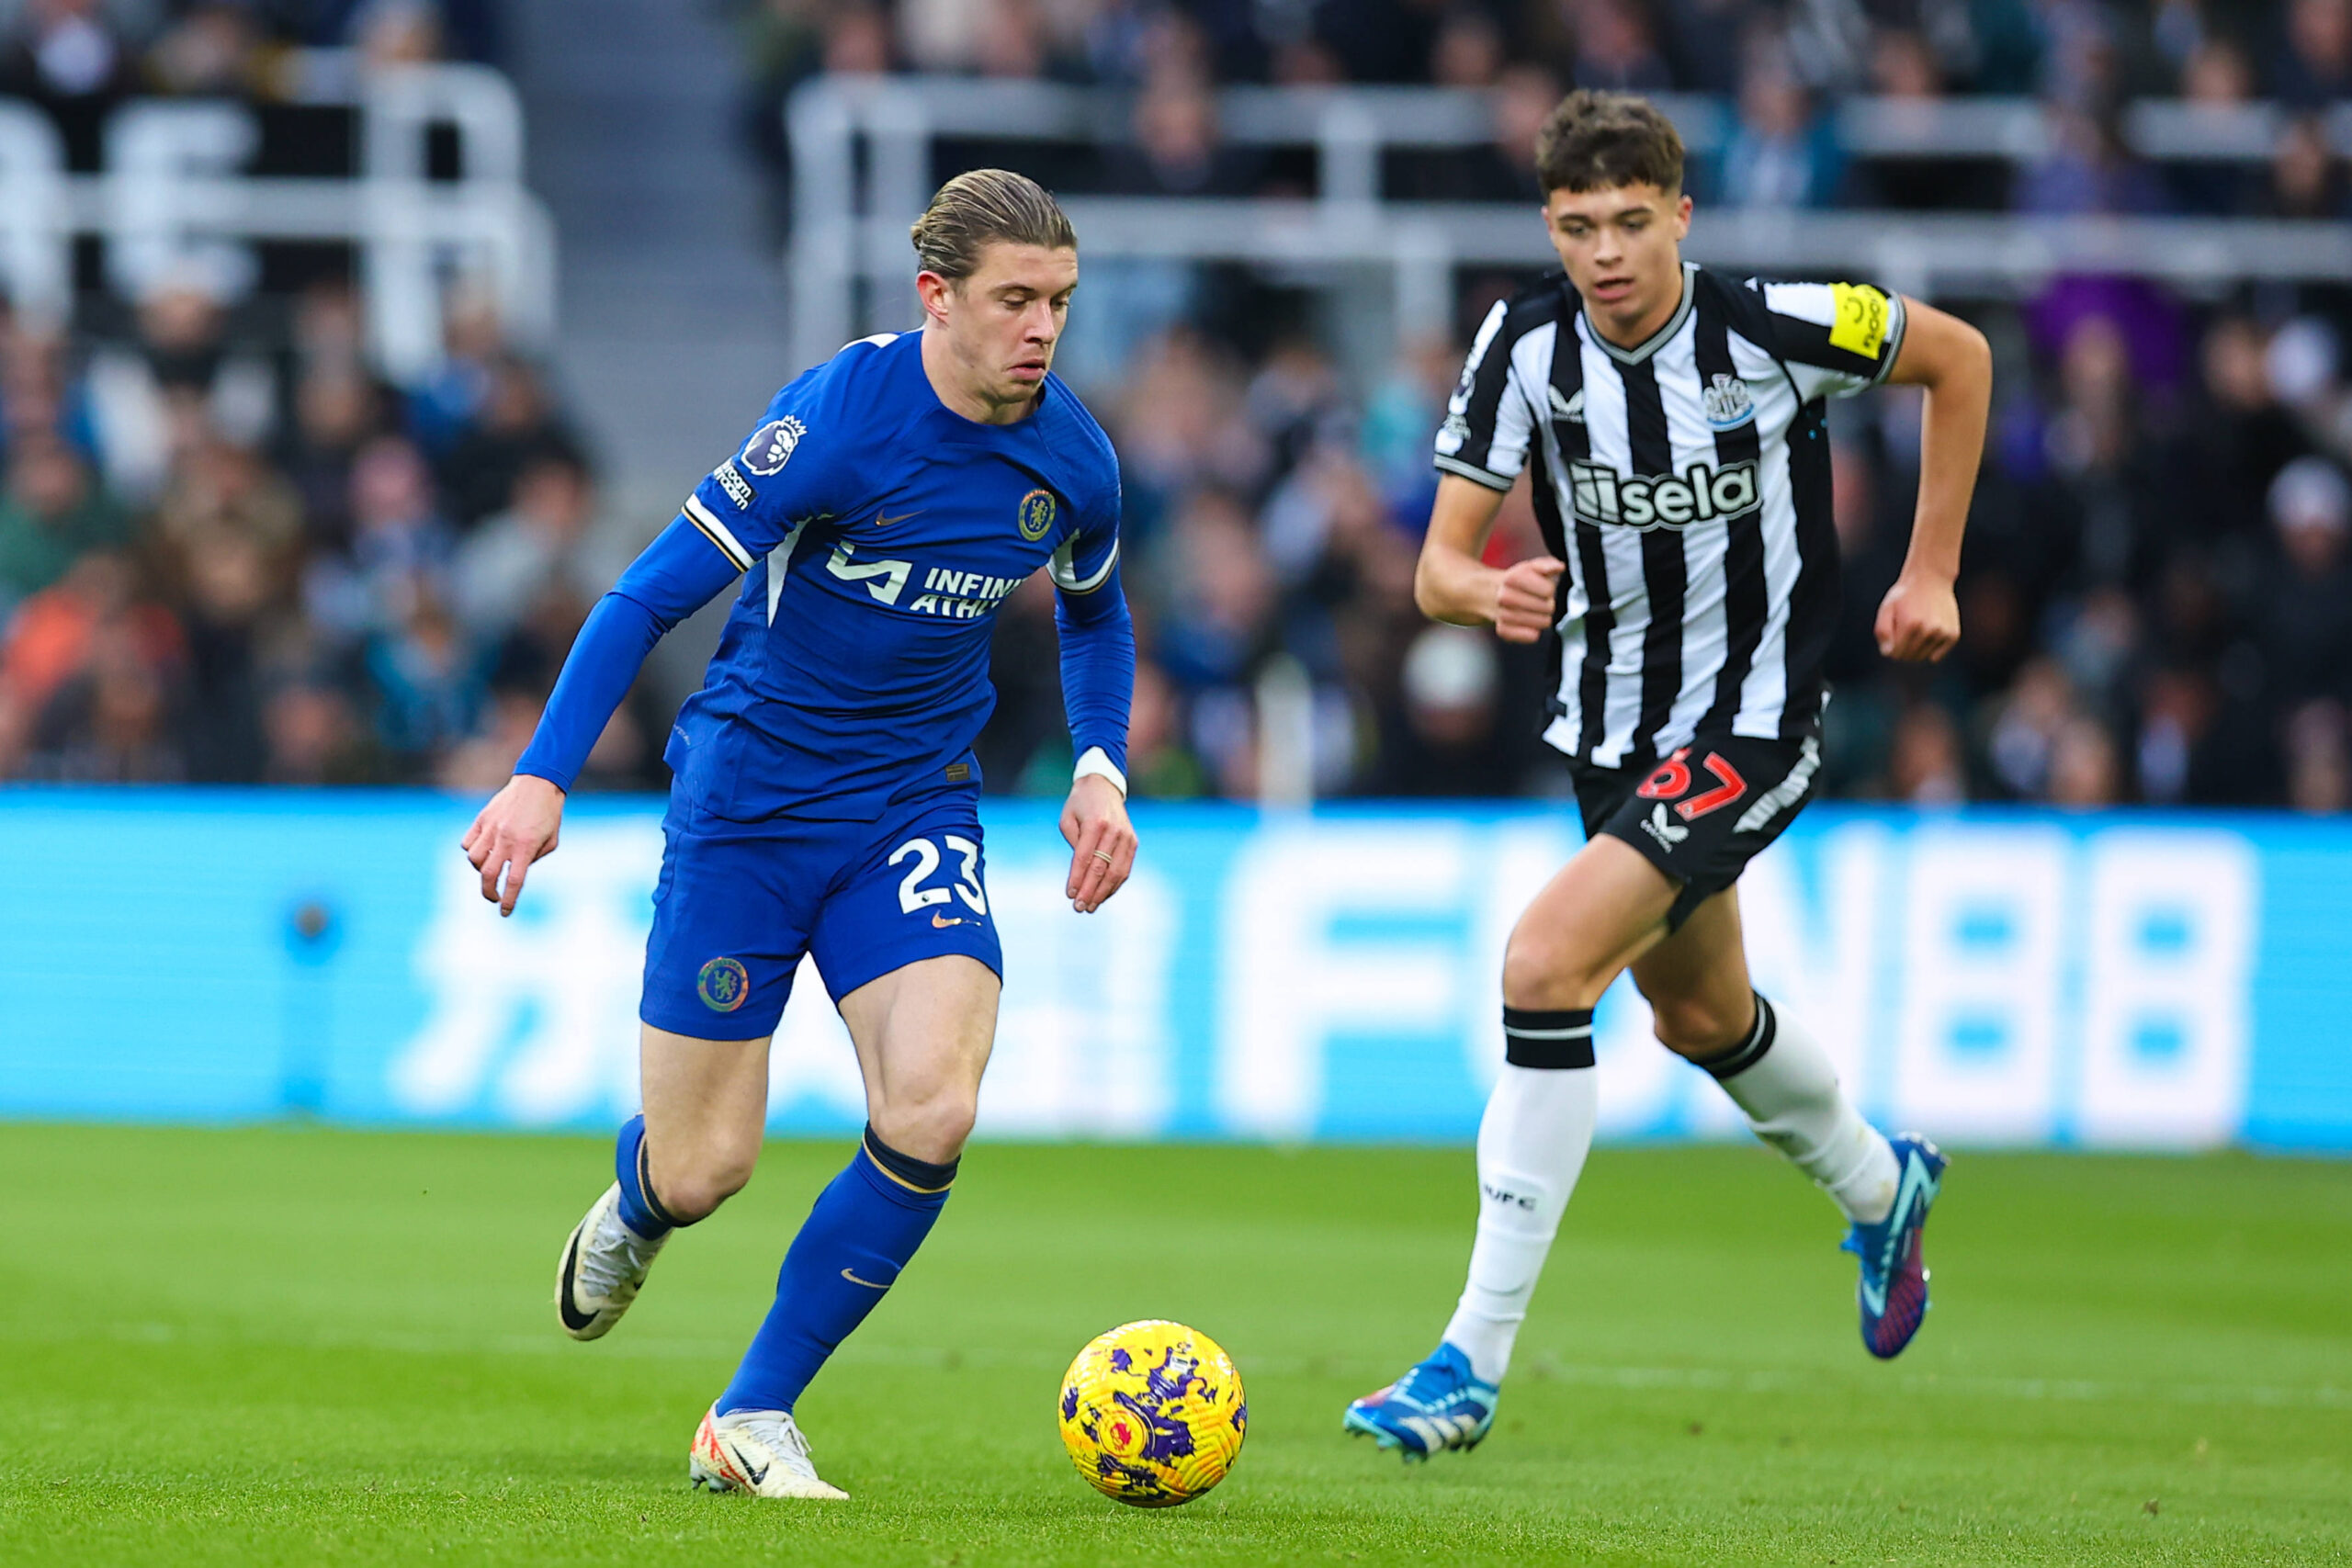 Conor Gallagher in action for Chelsea against Newcastle United.